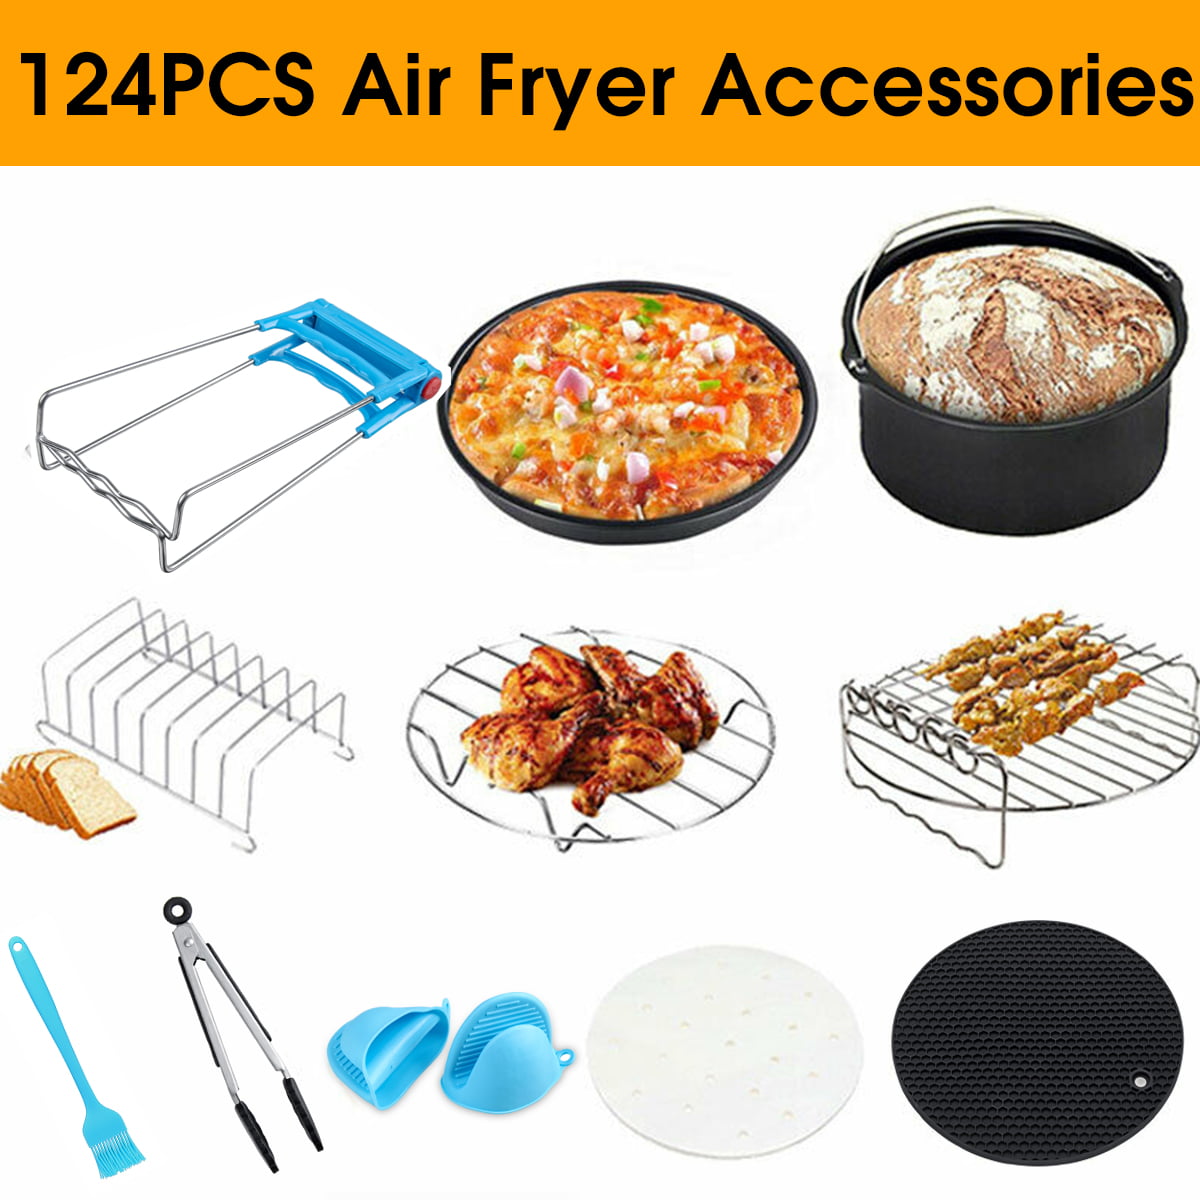 13PCS Air Fryer Accessories 7 Inch Fits All 3.7QT 4.2QT 5.3QT for Phillips and Cozyna Air Fryer Including Cake/Pizza Pan,Metal Bracket,Baking Rack,Silicone Mat 